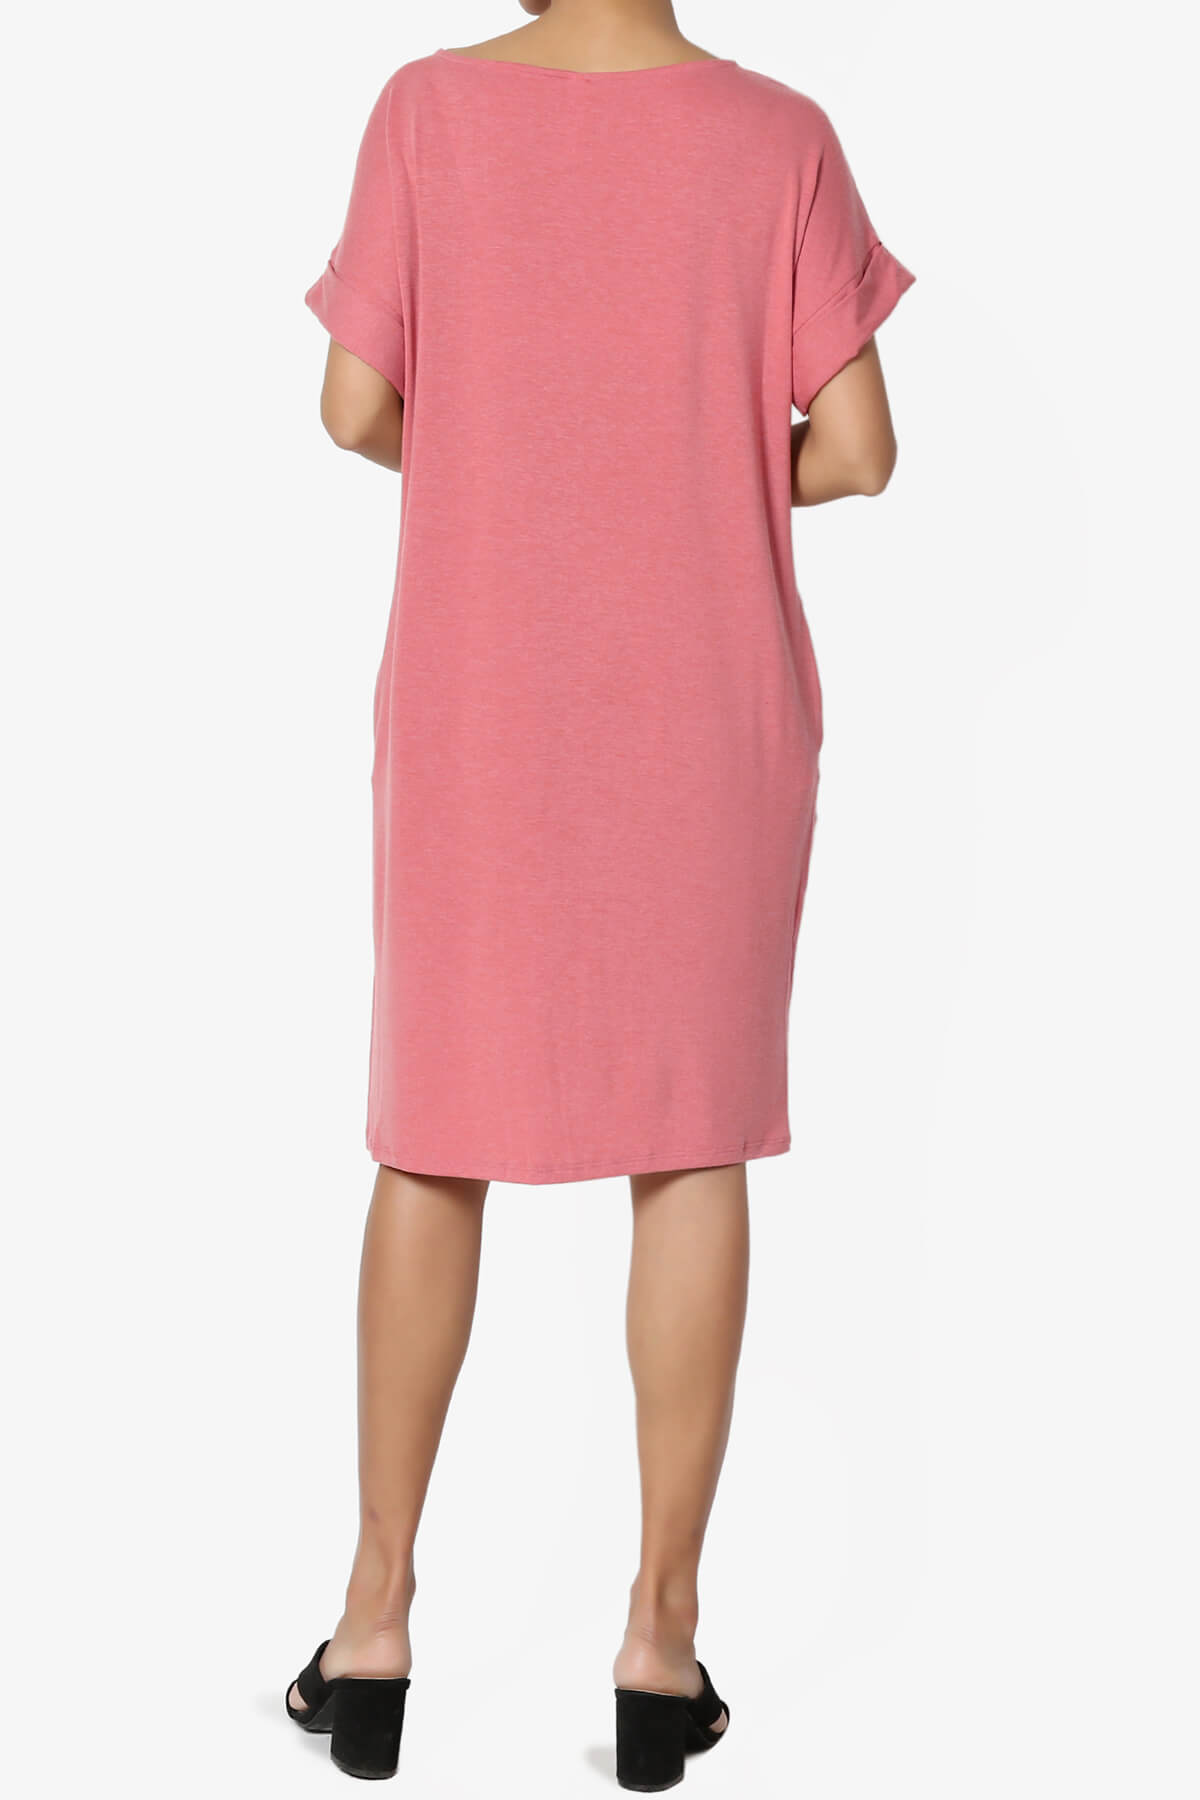 Load image into Gallery viewer, Janie Rolled Short Sleeve Round Neck Dress DESERT ROSE_2
